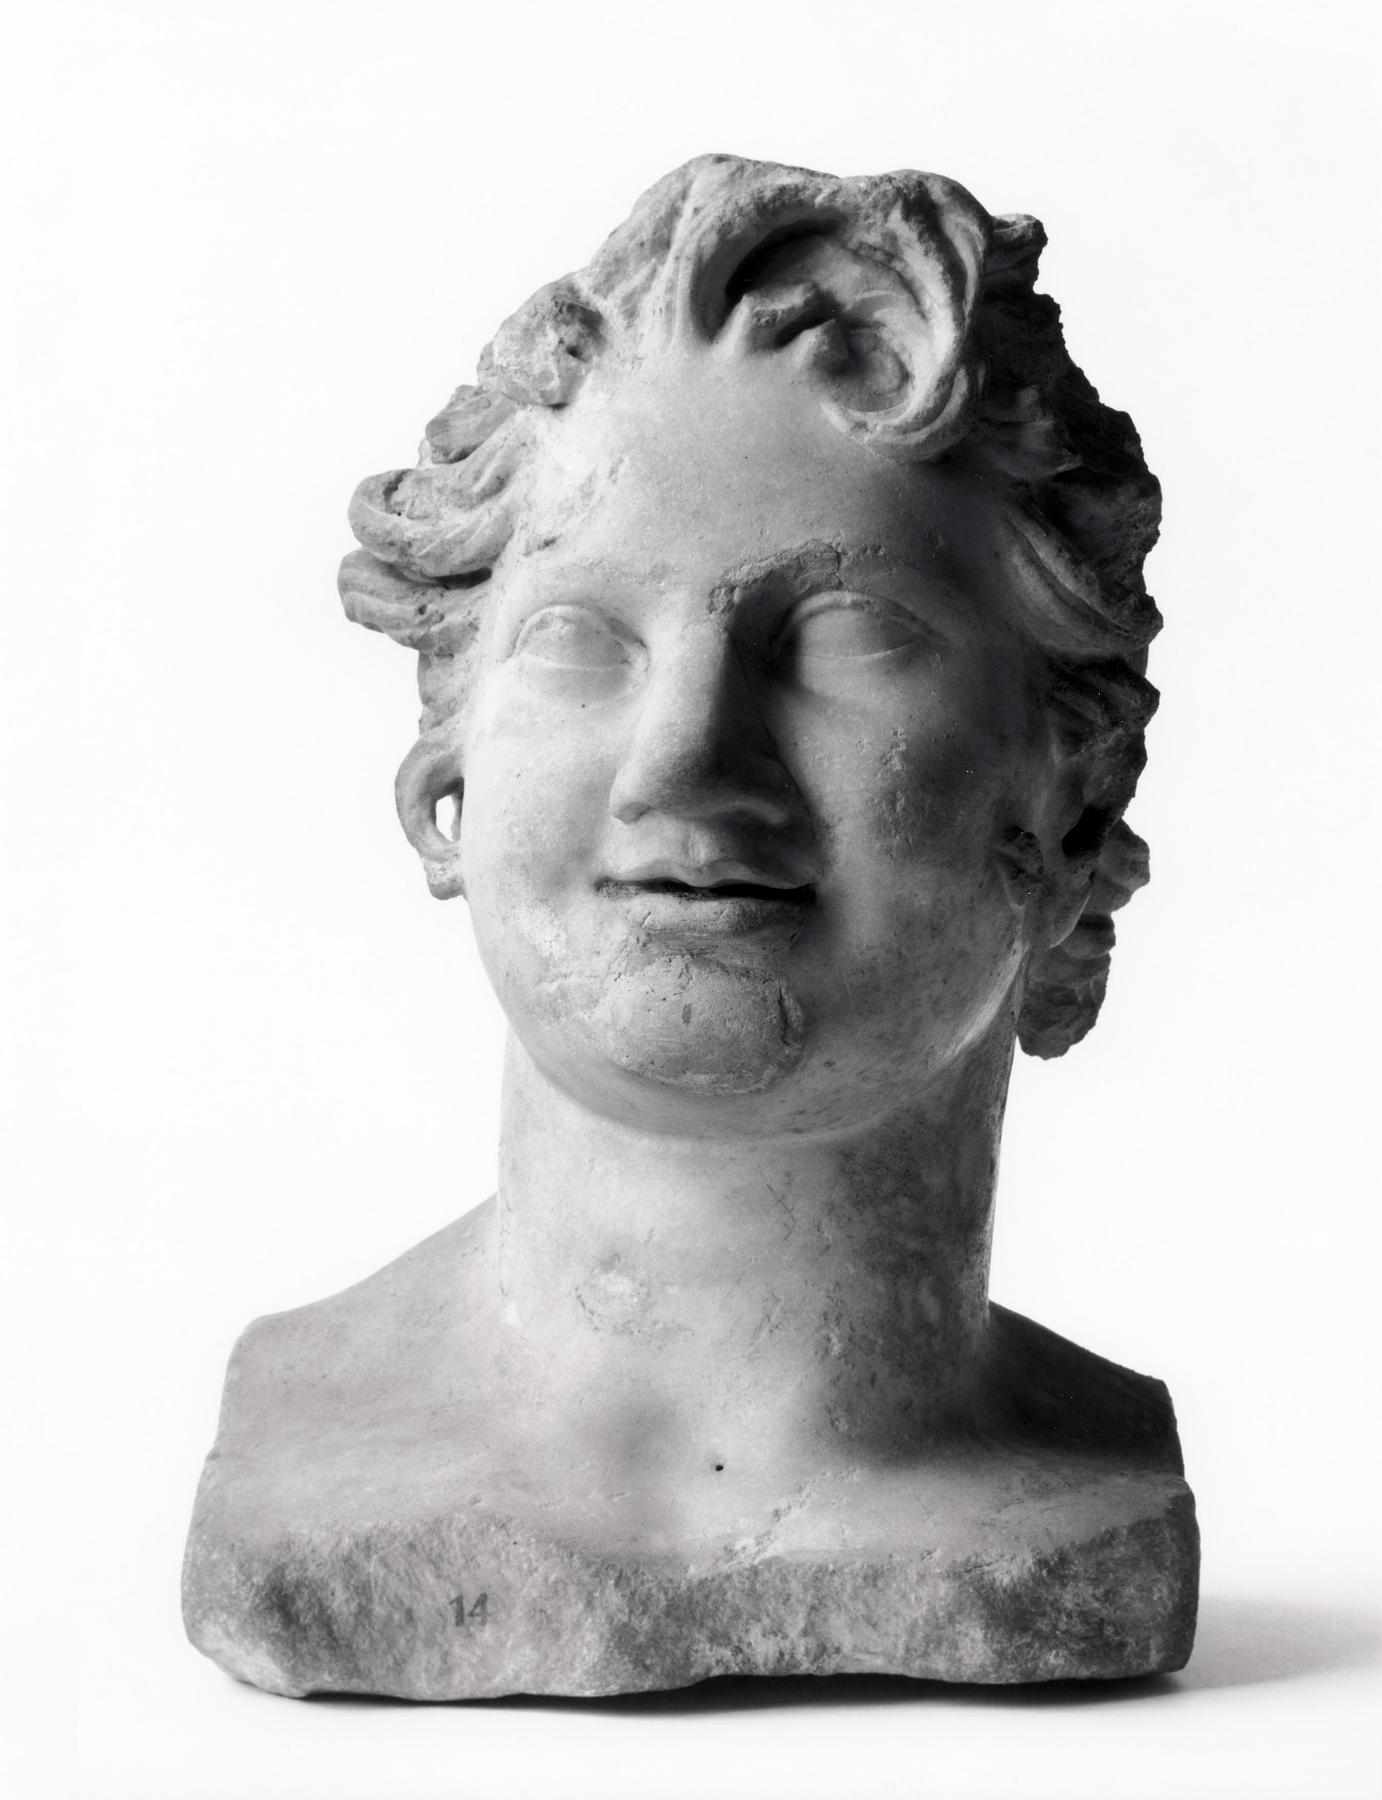 Herm of a young satyr, H1414